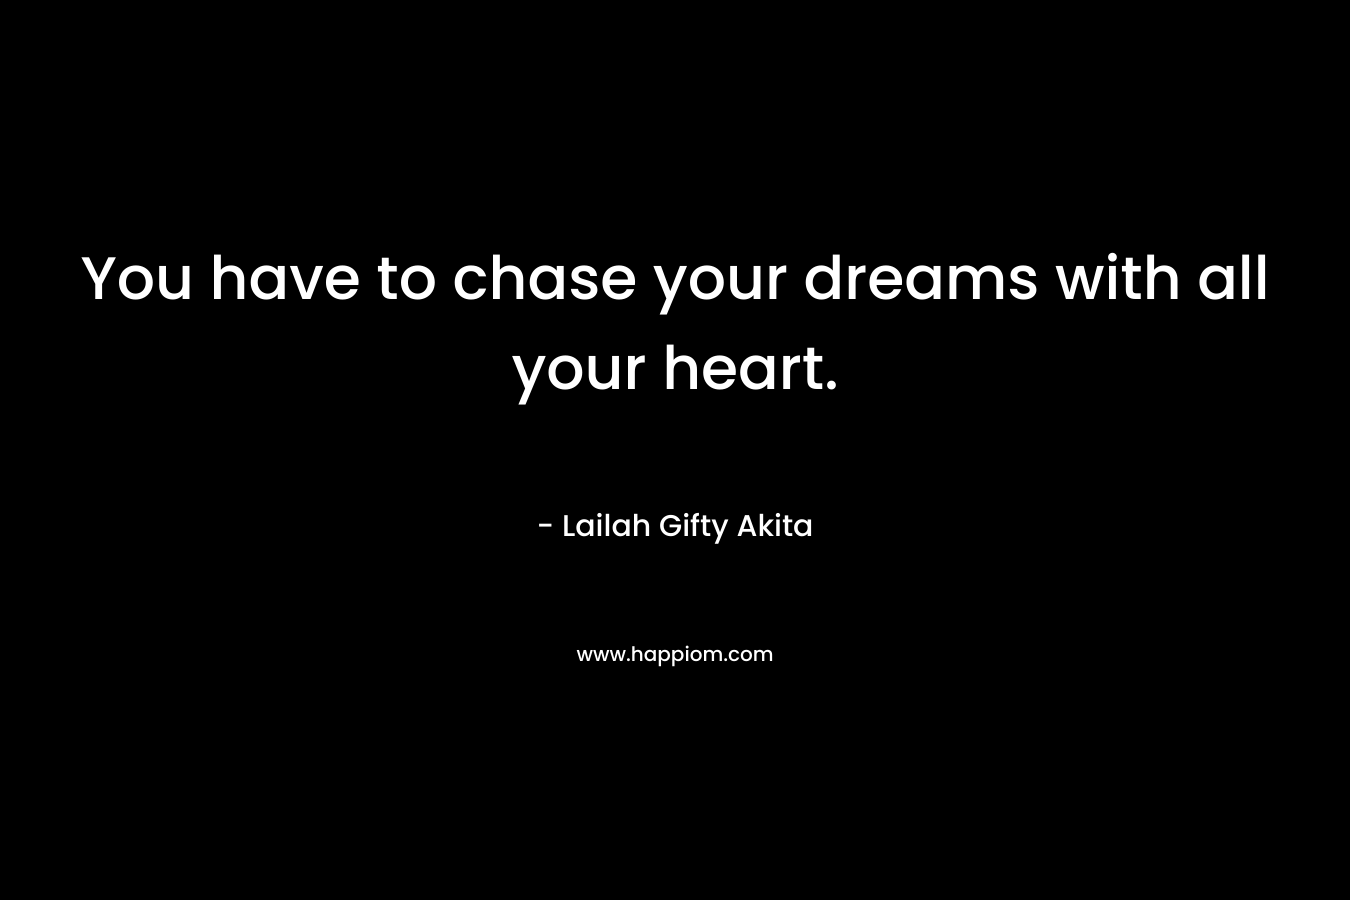 You have to chase your dreams with all your heart.